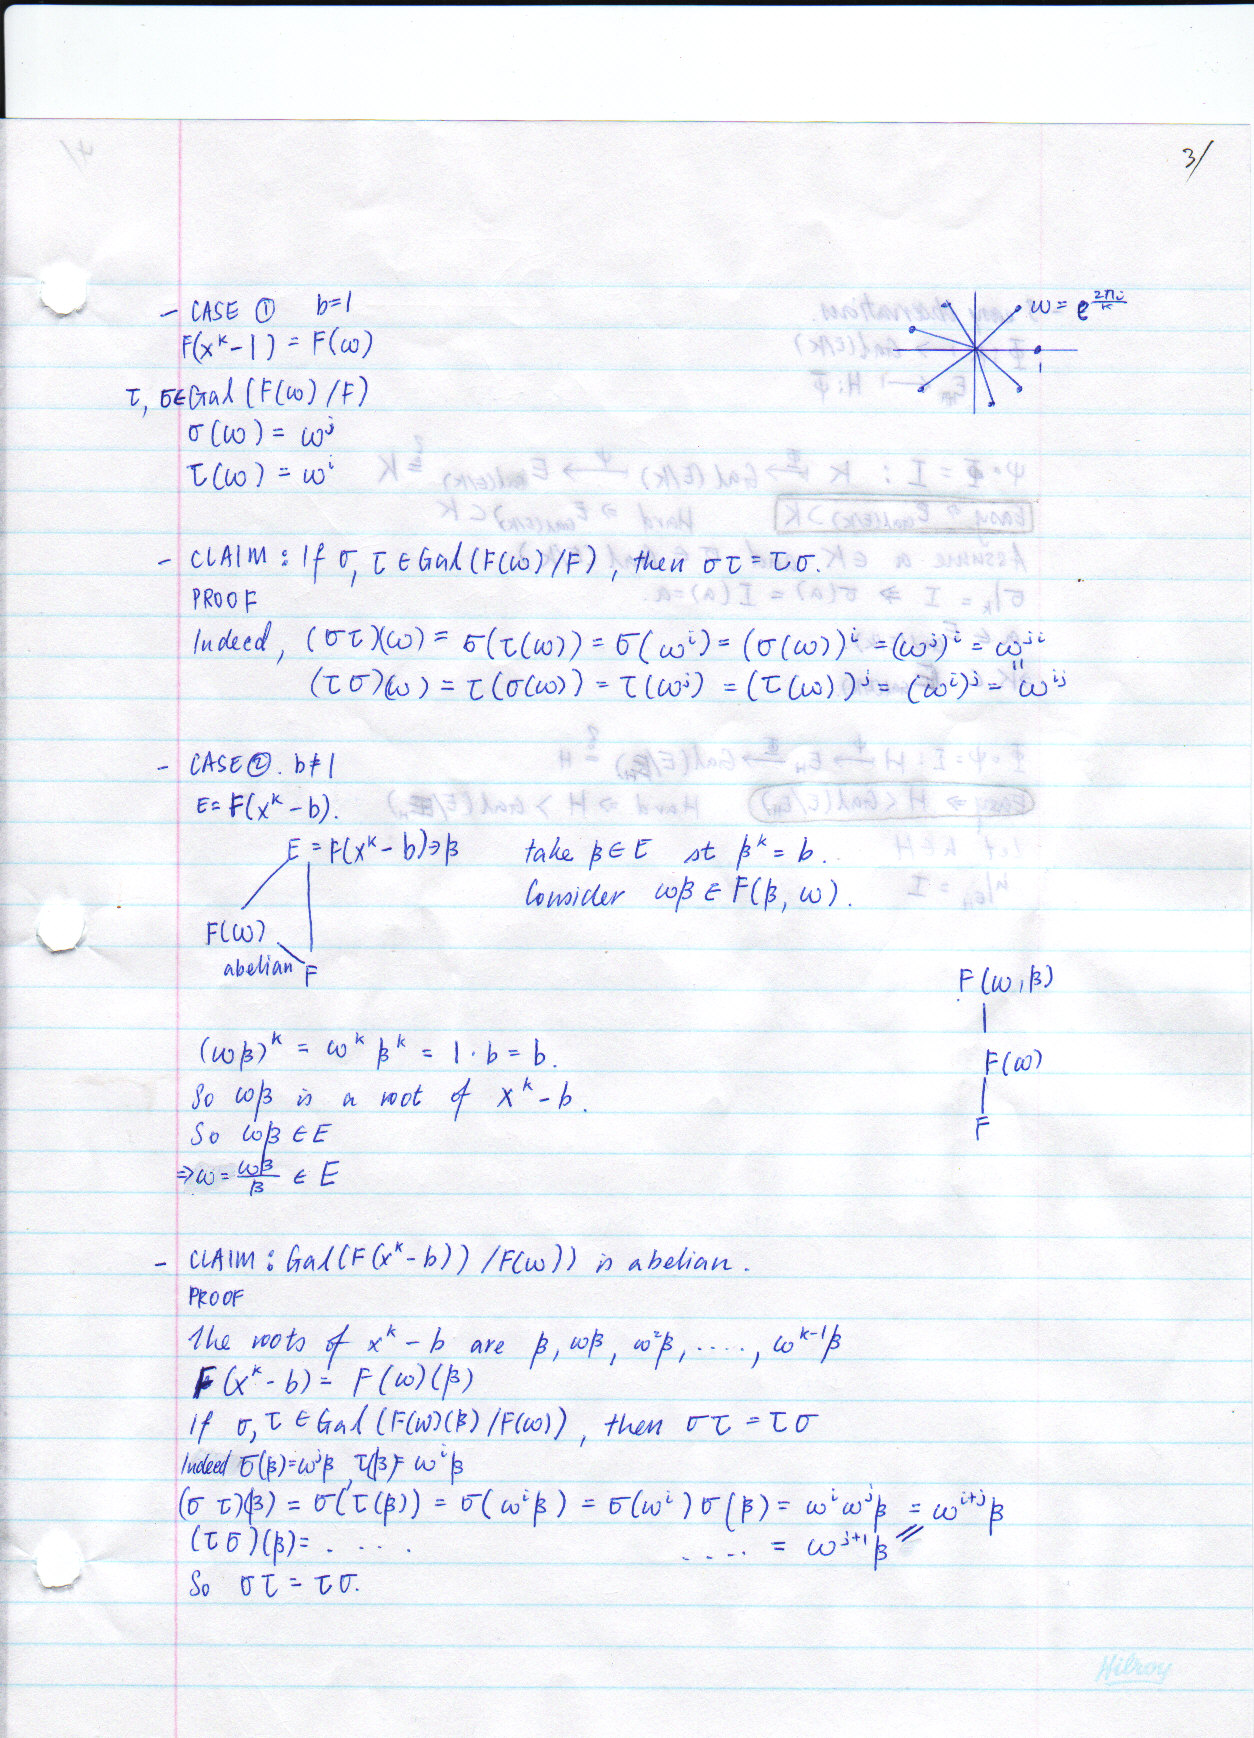 07-401 lecture 13 pg 3.jpg